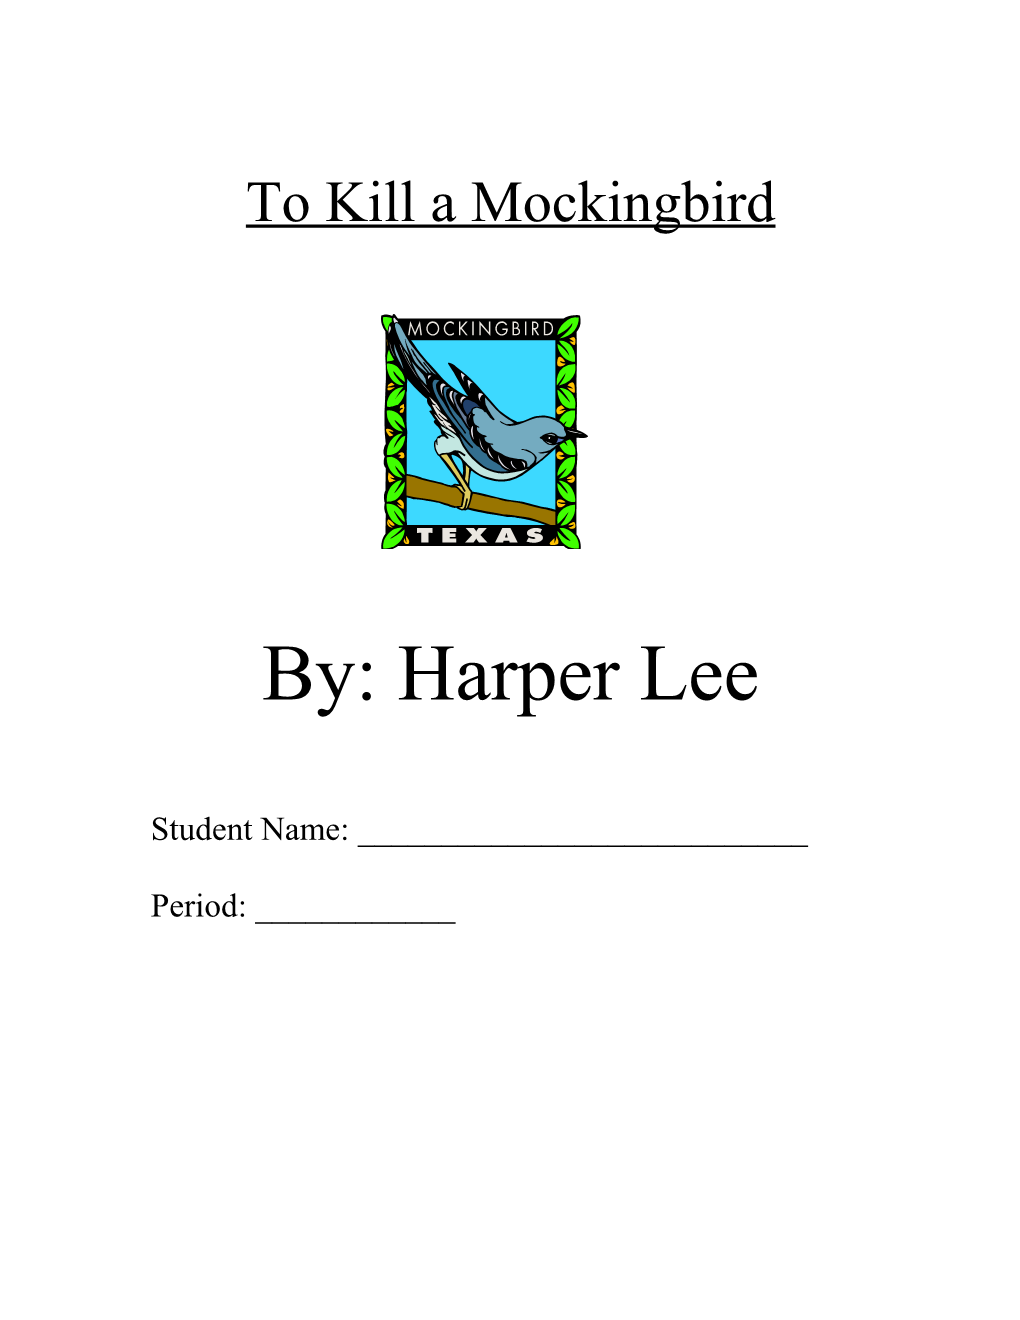 The Life and Work of Harper Lee